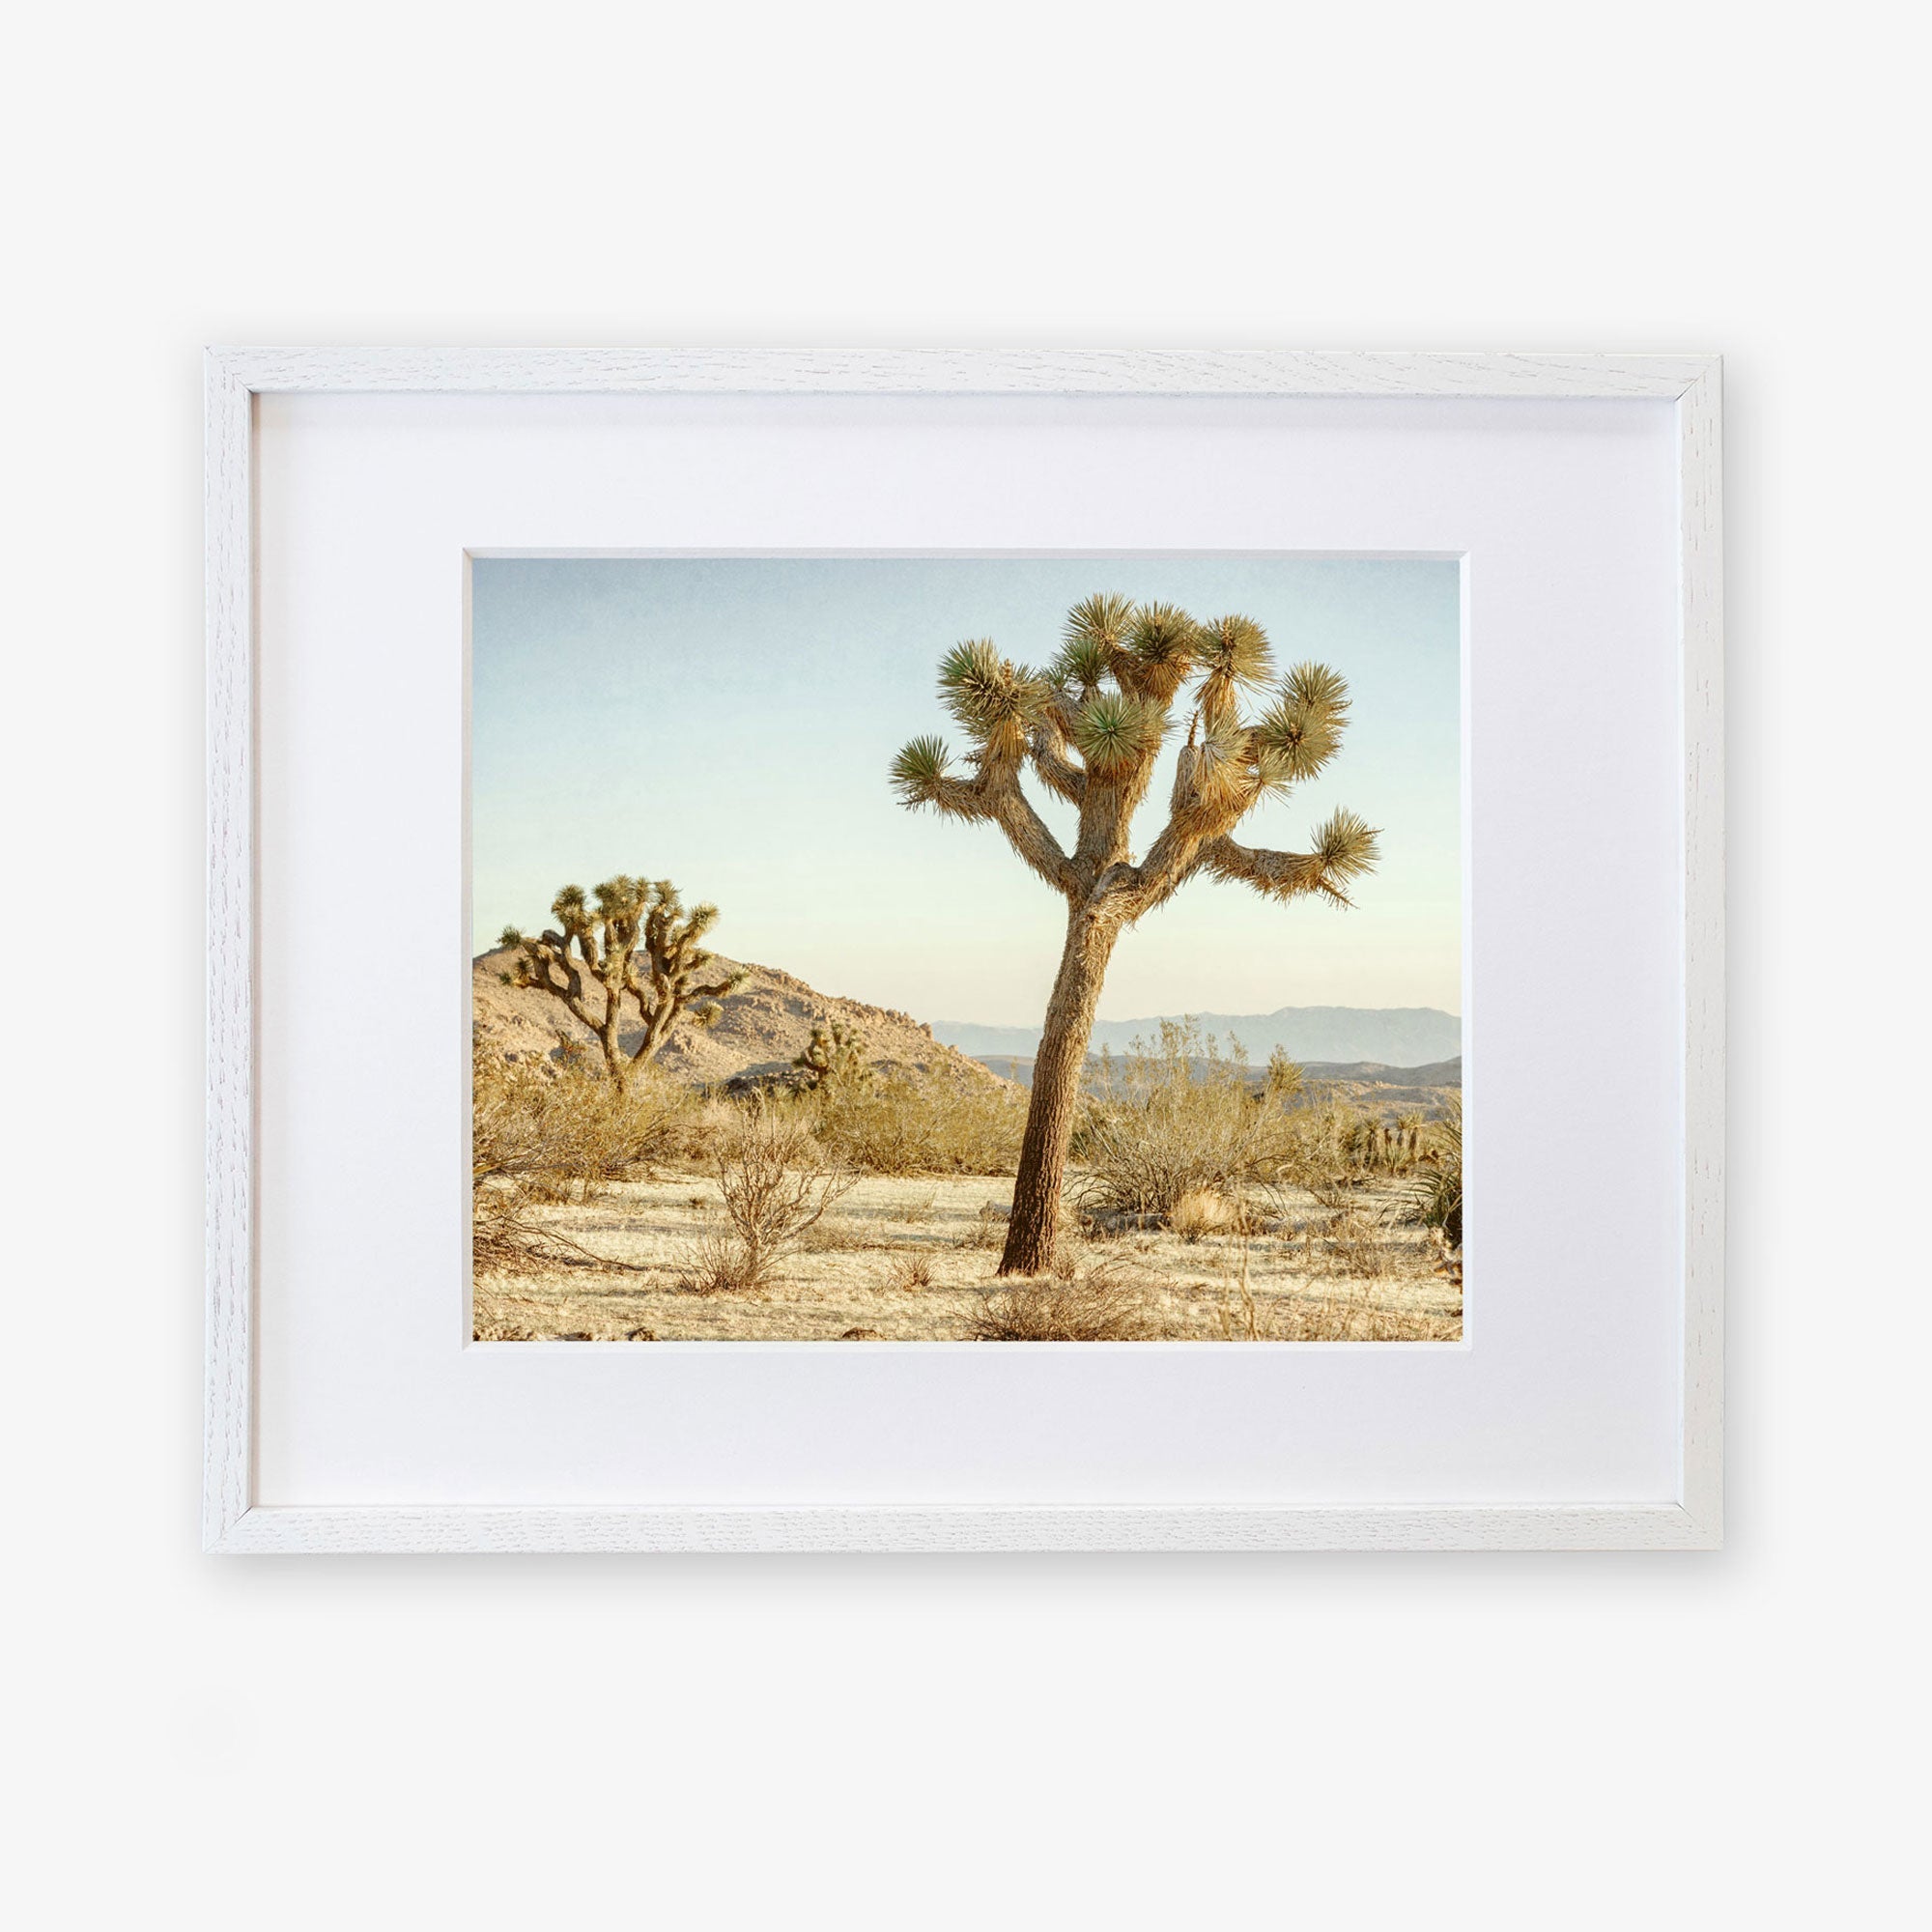 A framed photograph of a Mighty Joshua Tree Print from Offley Green in a desert landscape, featuring blue skies and sparse vegetation, displayed within a white rectangular frame against a white background.